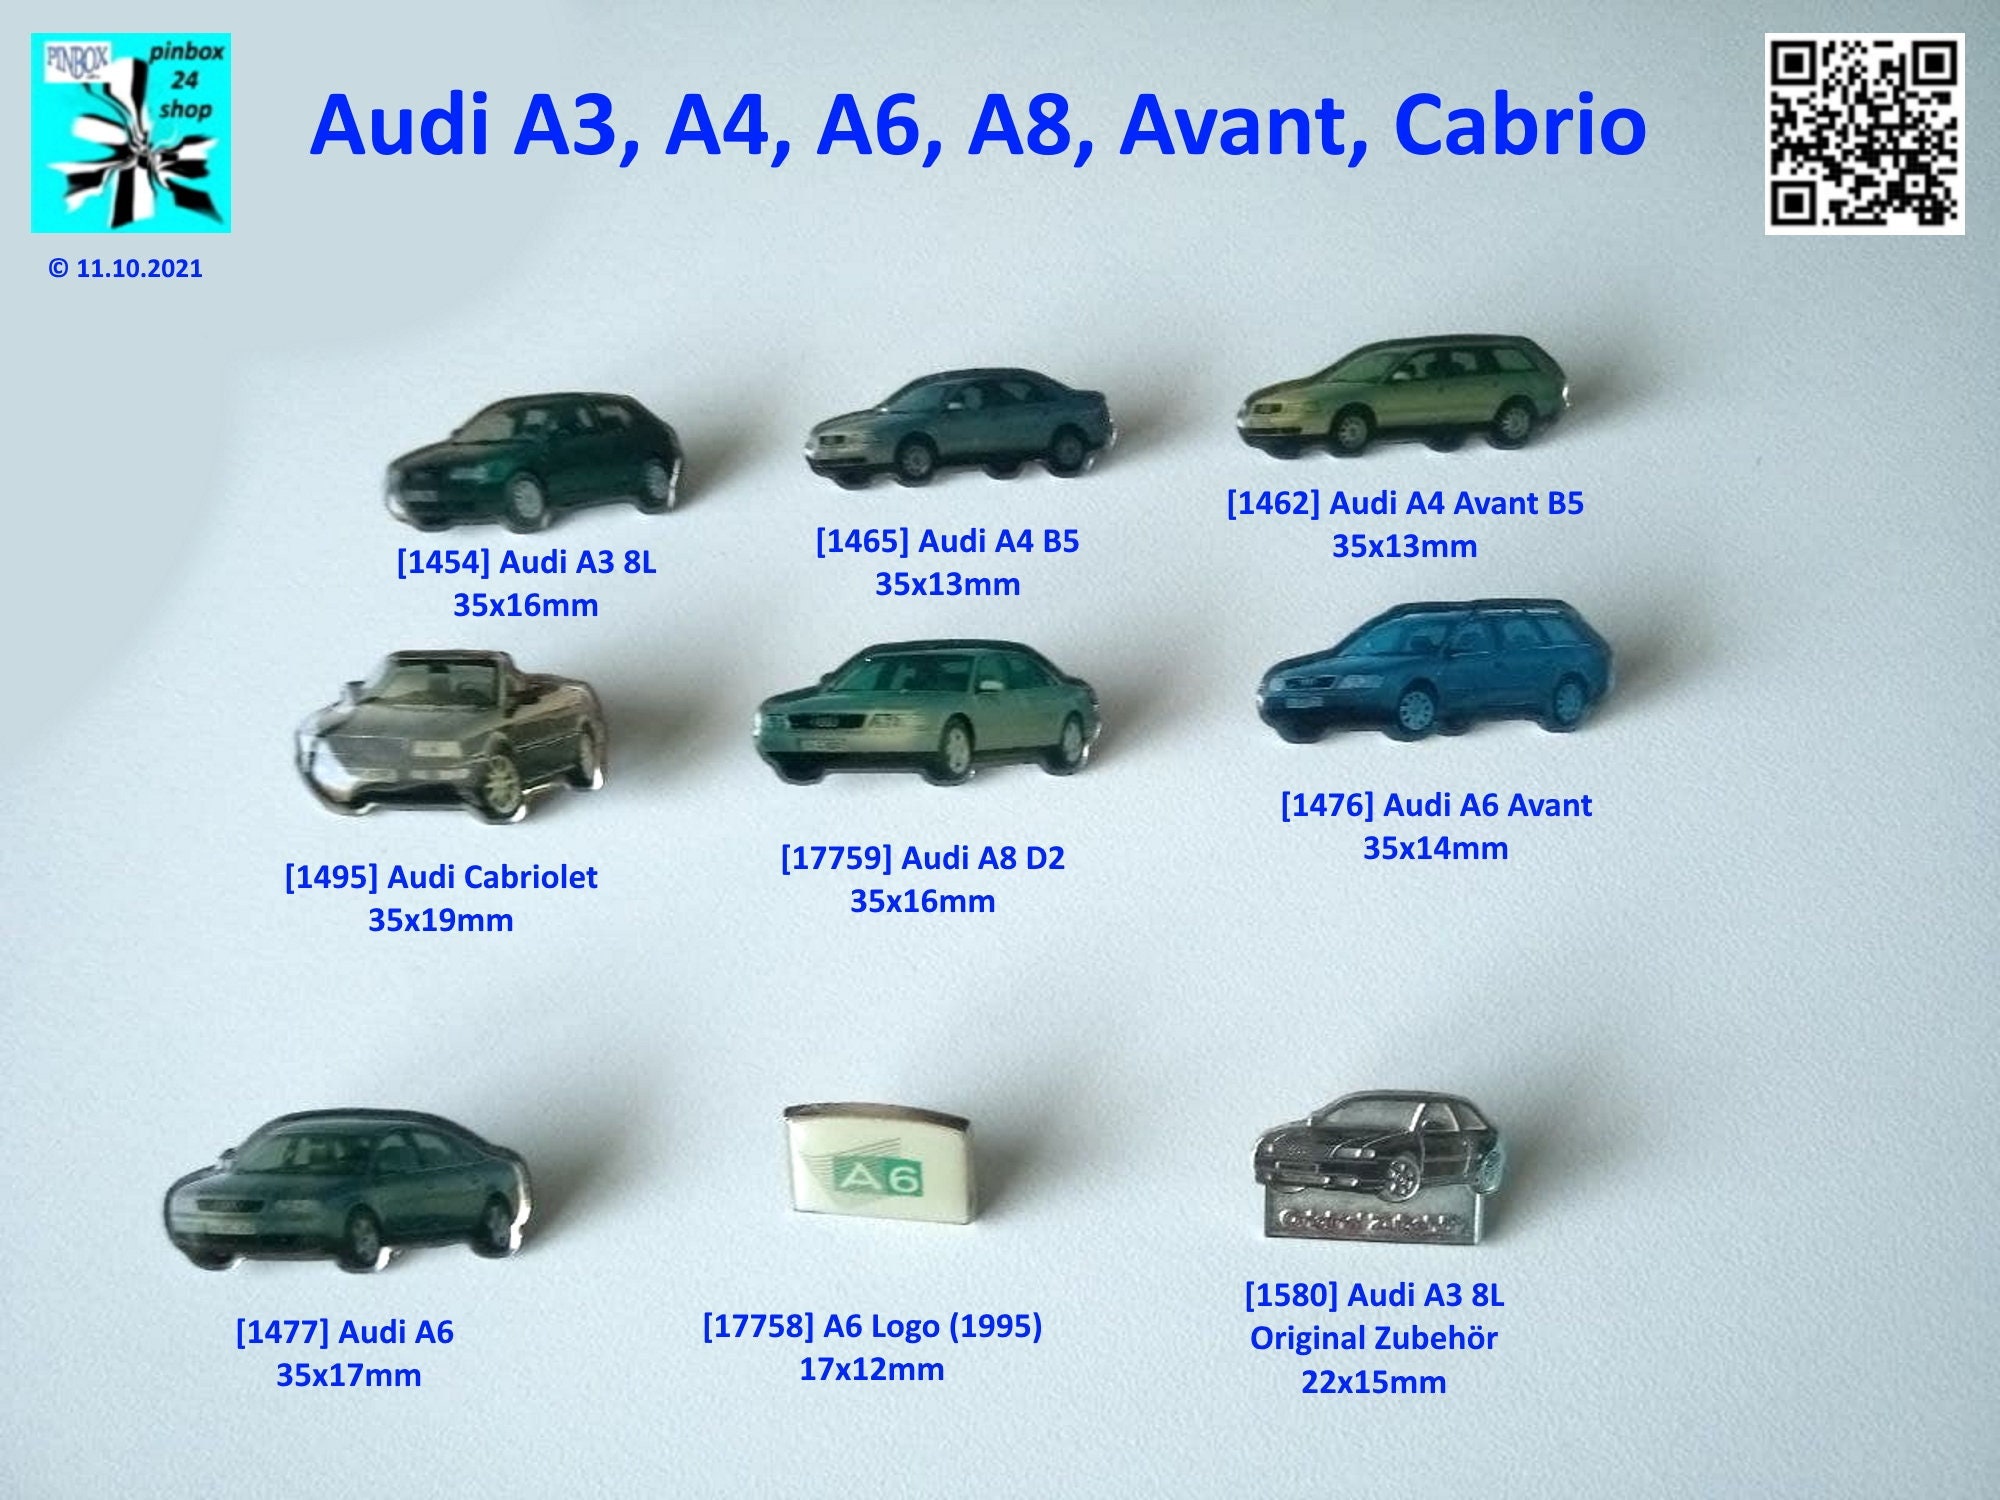 Attention Audi Lovers: Select Your A3, A4, A6, A8, Avant or Cabrio Pin 